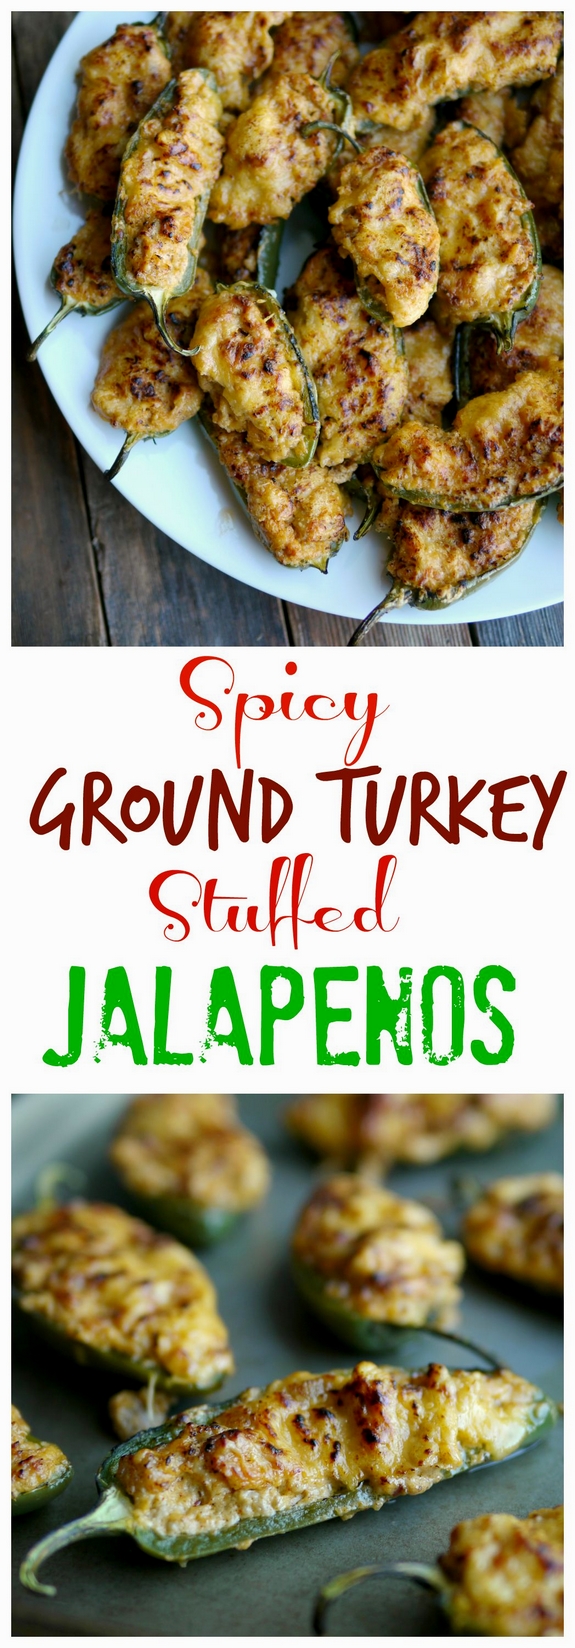 Spicy Ground Turkey Stuffed Jalapenos a perfect game day appetizer GO TEAM